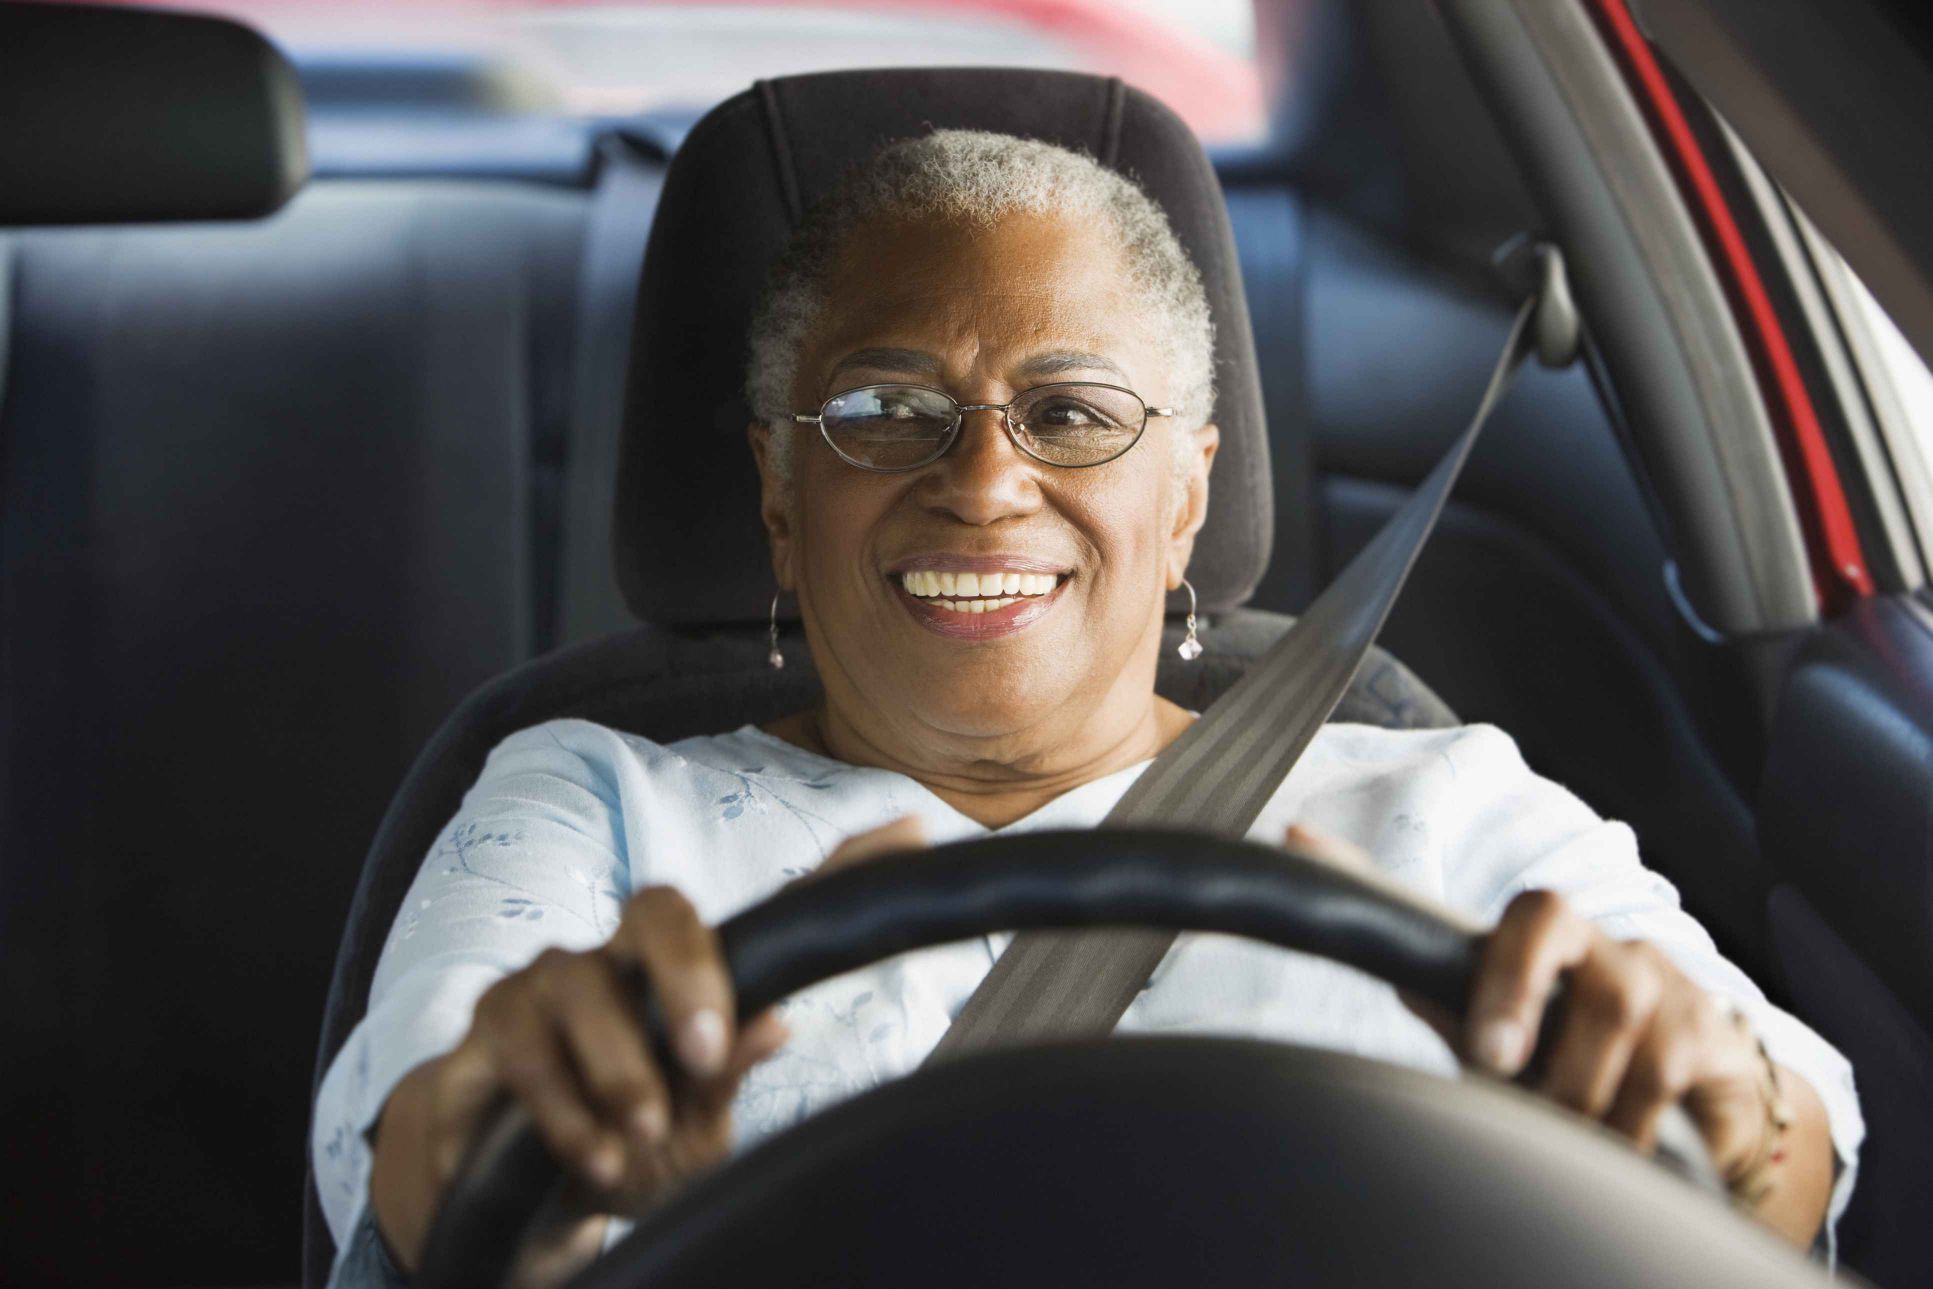 An elderly female drives her car, which signifies her skill.